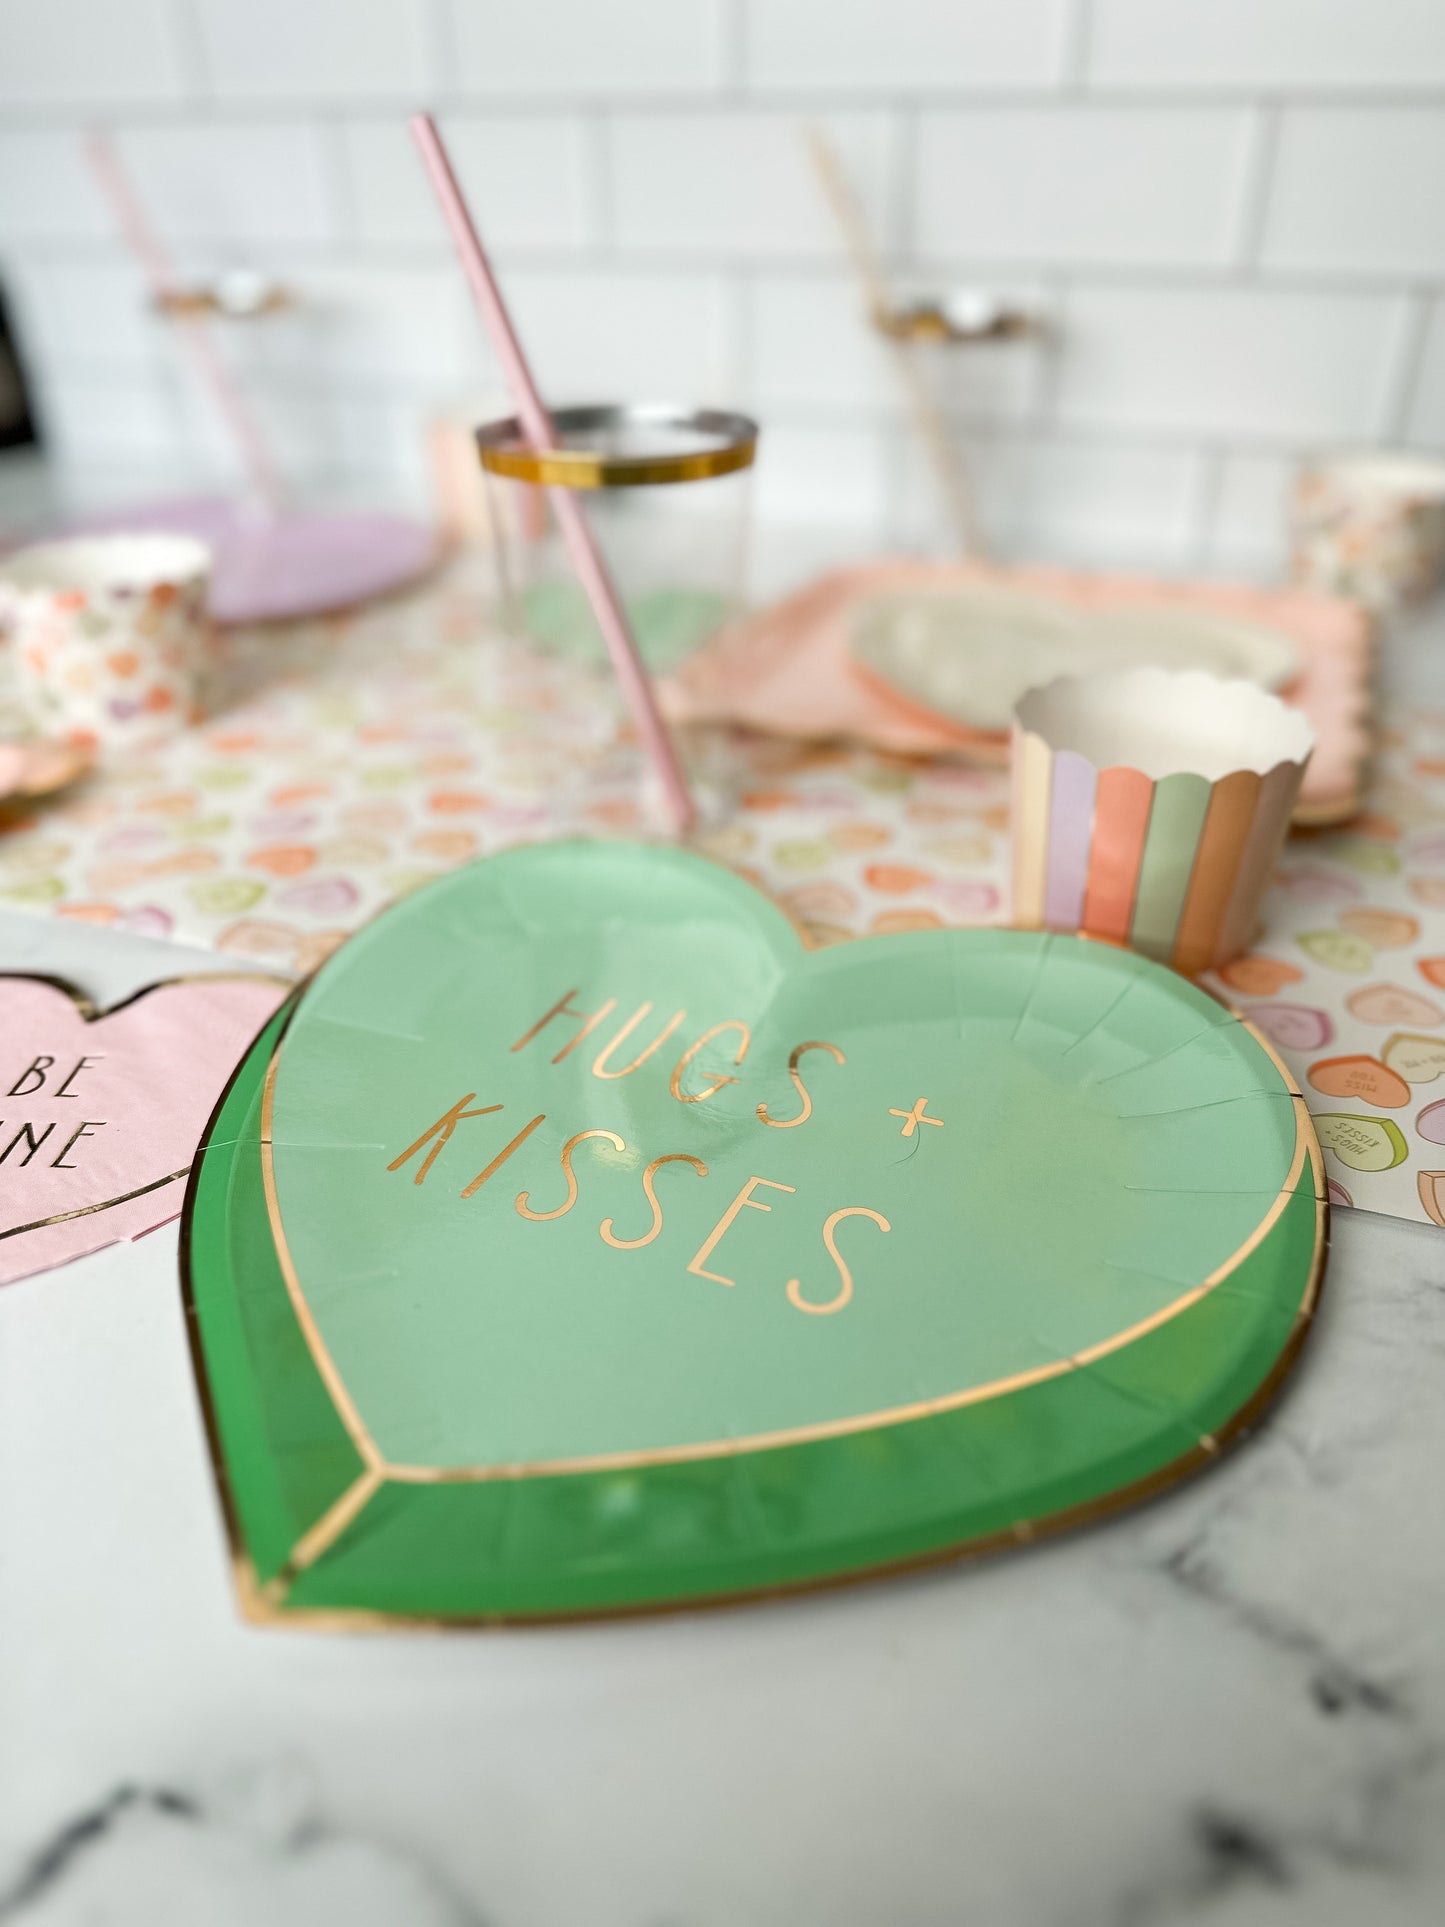 Sweetheart  Valentines Party Box | Candy Heart Themed Party